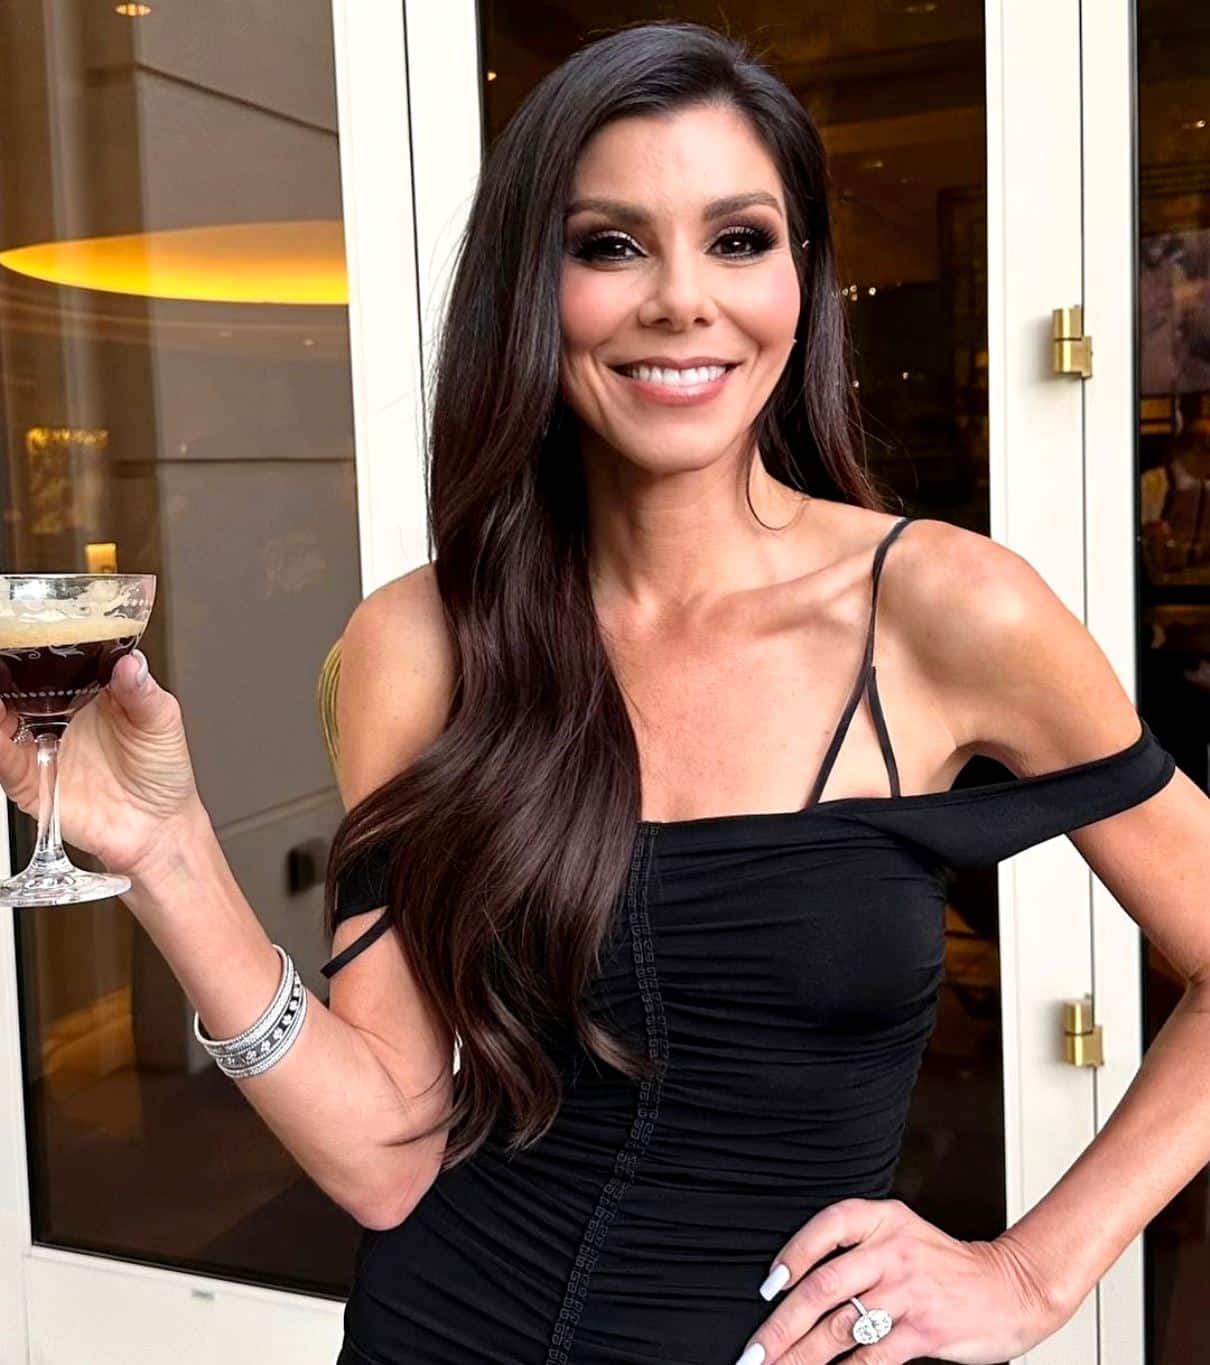 Heather Dubrow Shares What She Did With Cash From $55 Million Home Sale, Plus How RHOC Season 17 Nearly Broke Her as She Admits She Felt “Done” With Show Again